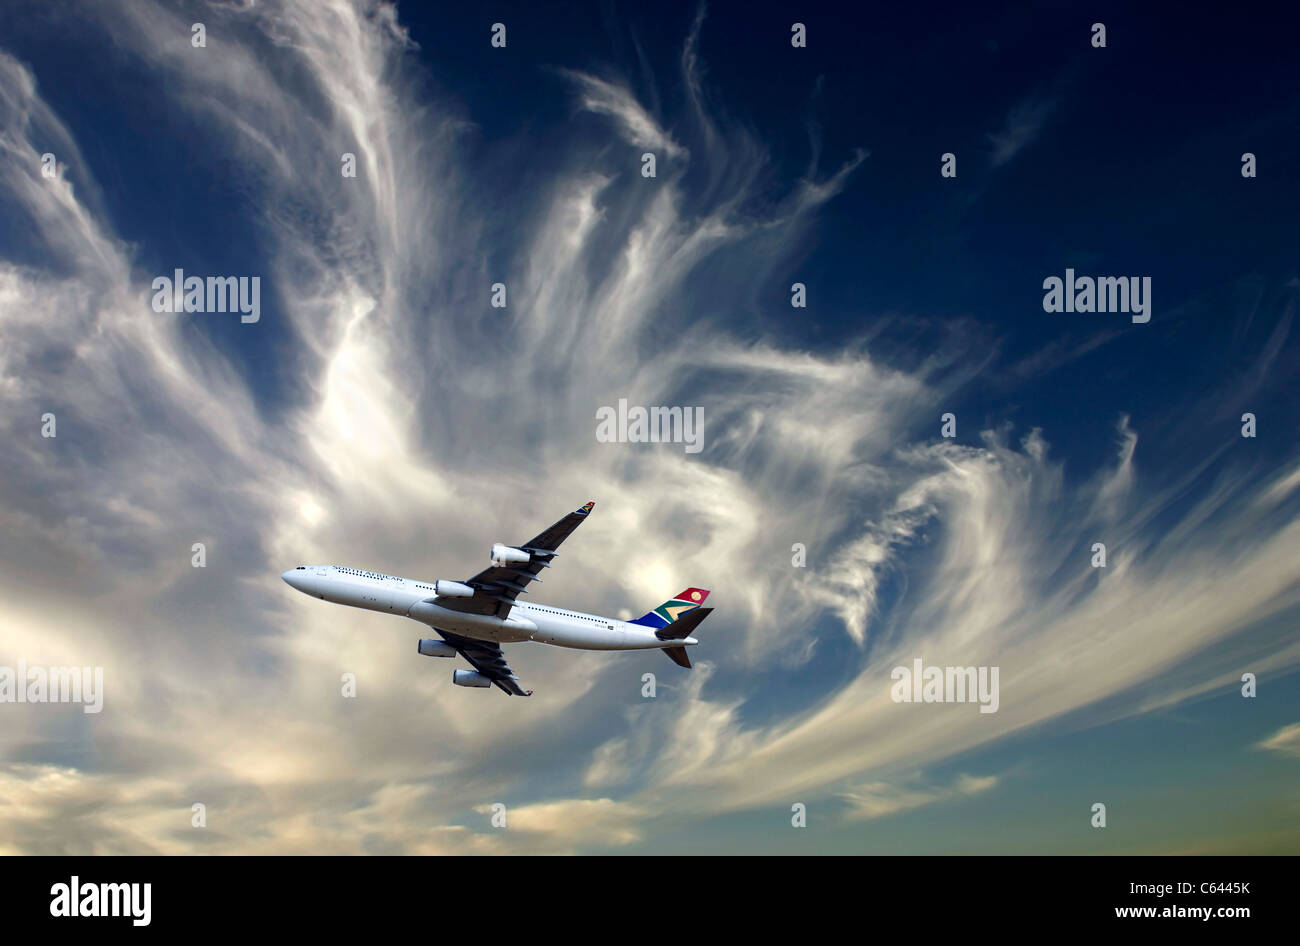 South African Airbus A340-600 jet aircraft against cloudy sky Stock Photo